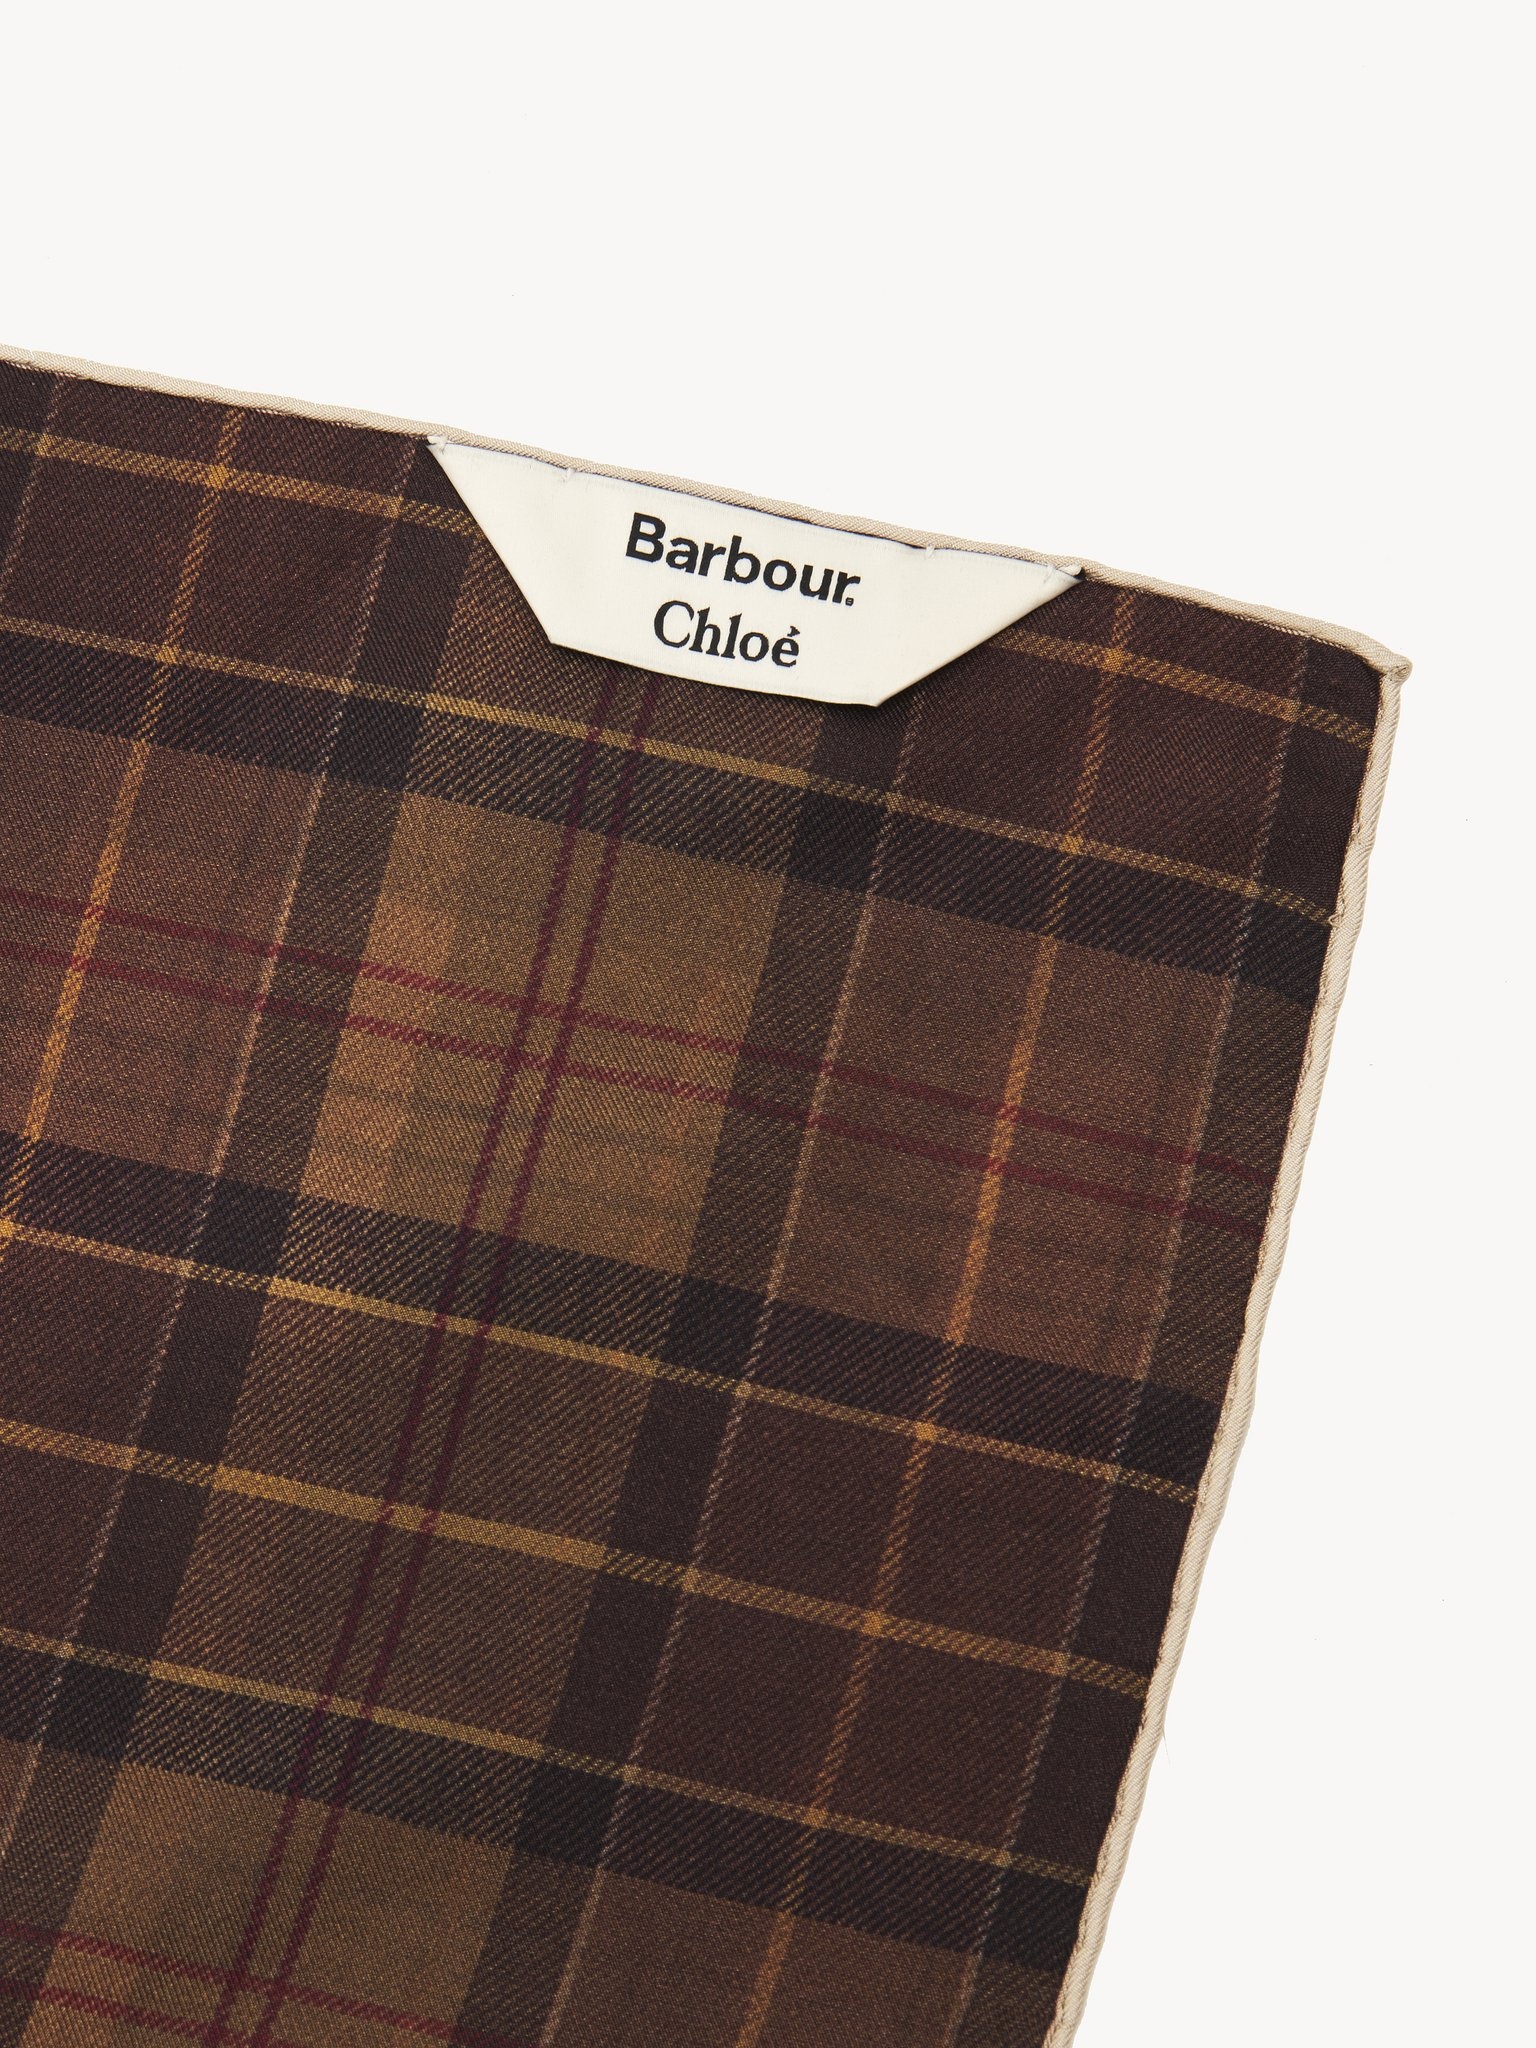 BARBOUR FOR CHLOÉ PRINTED SCARF - 4